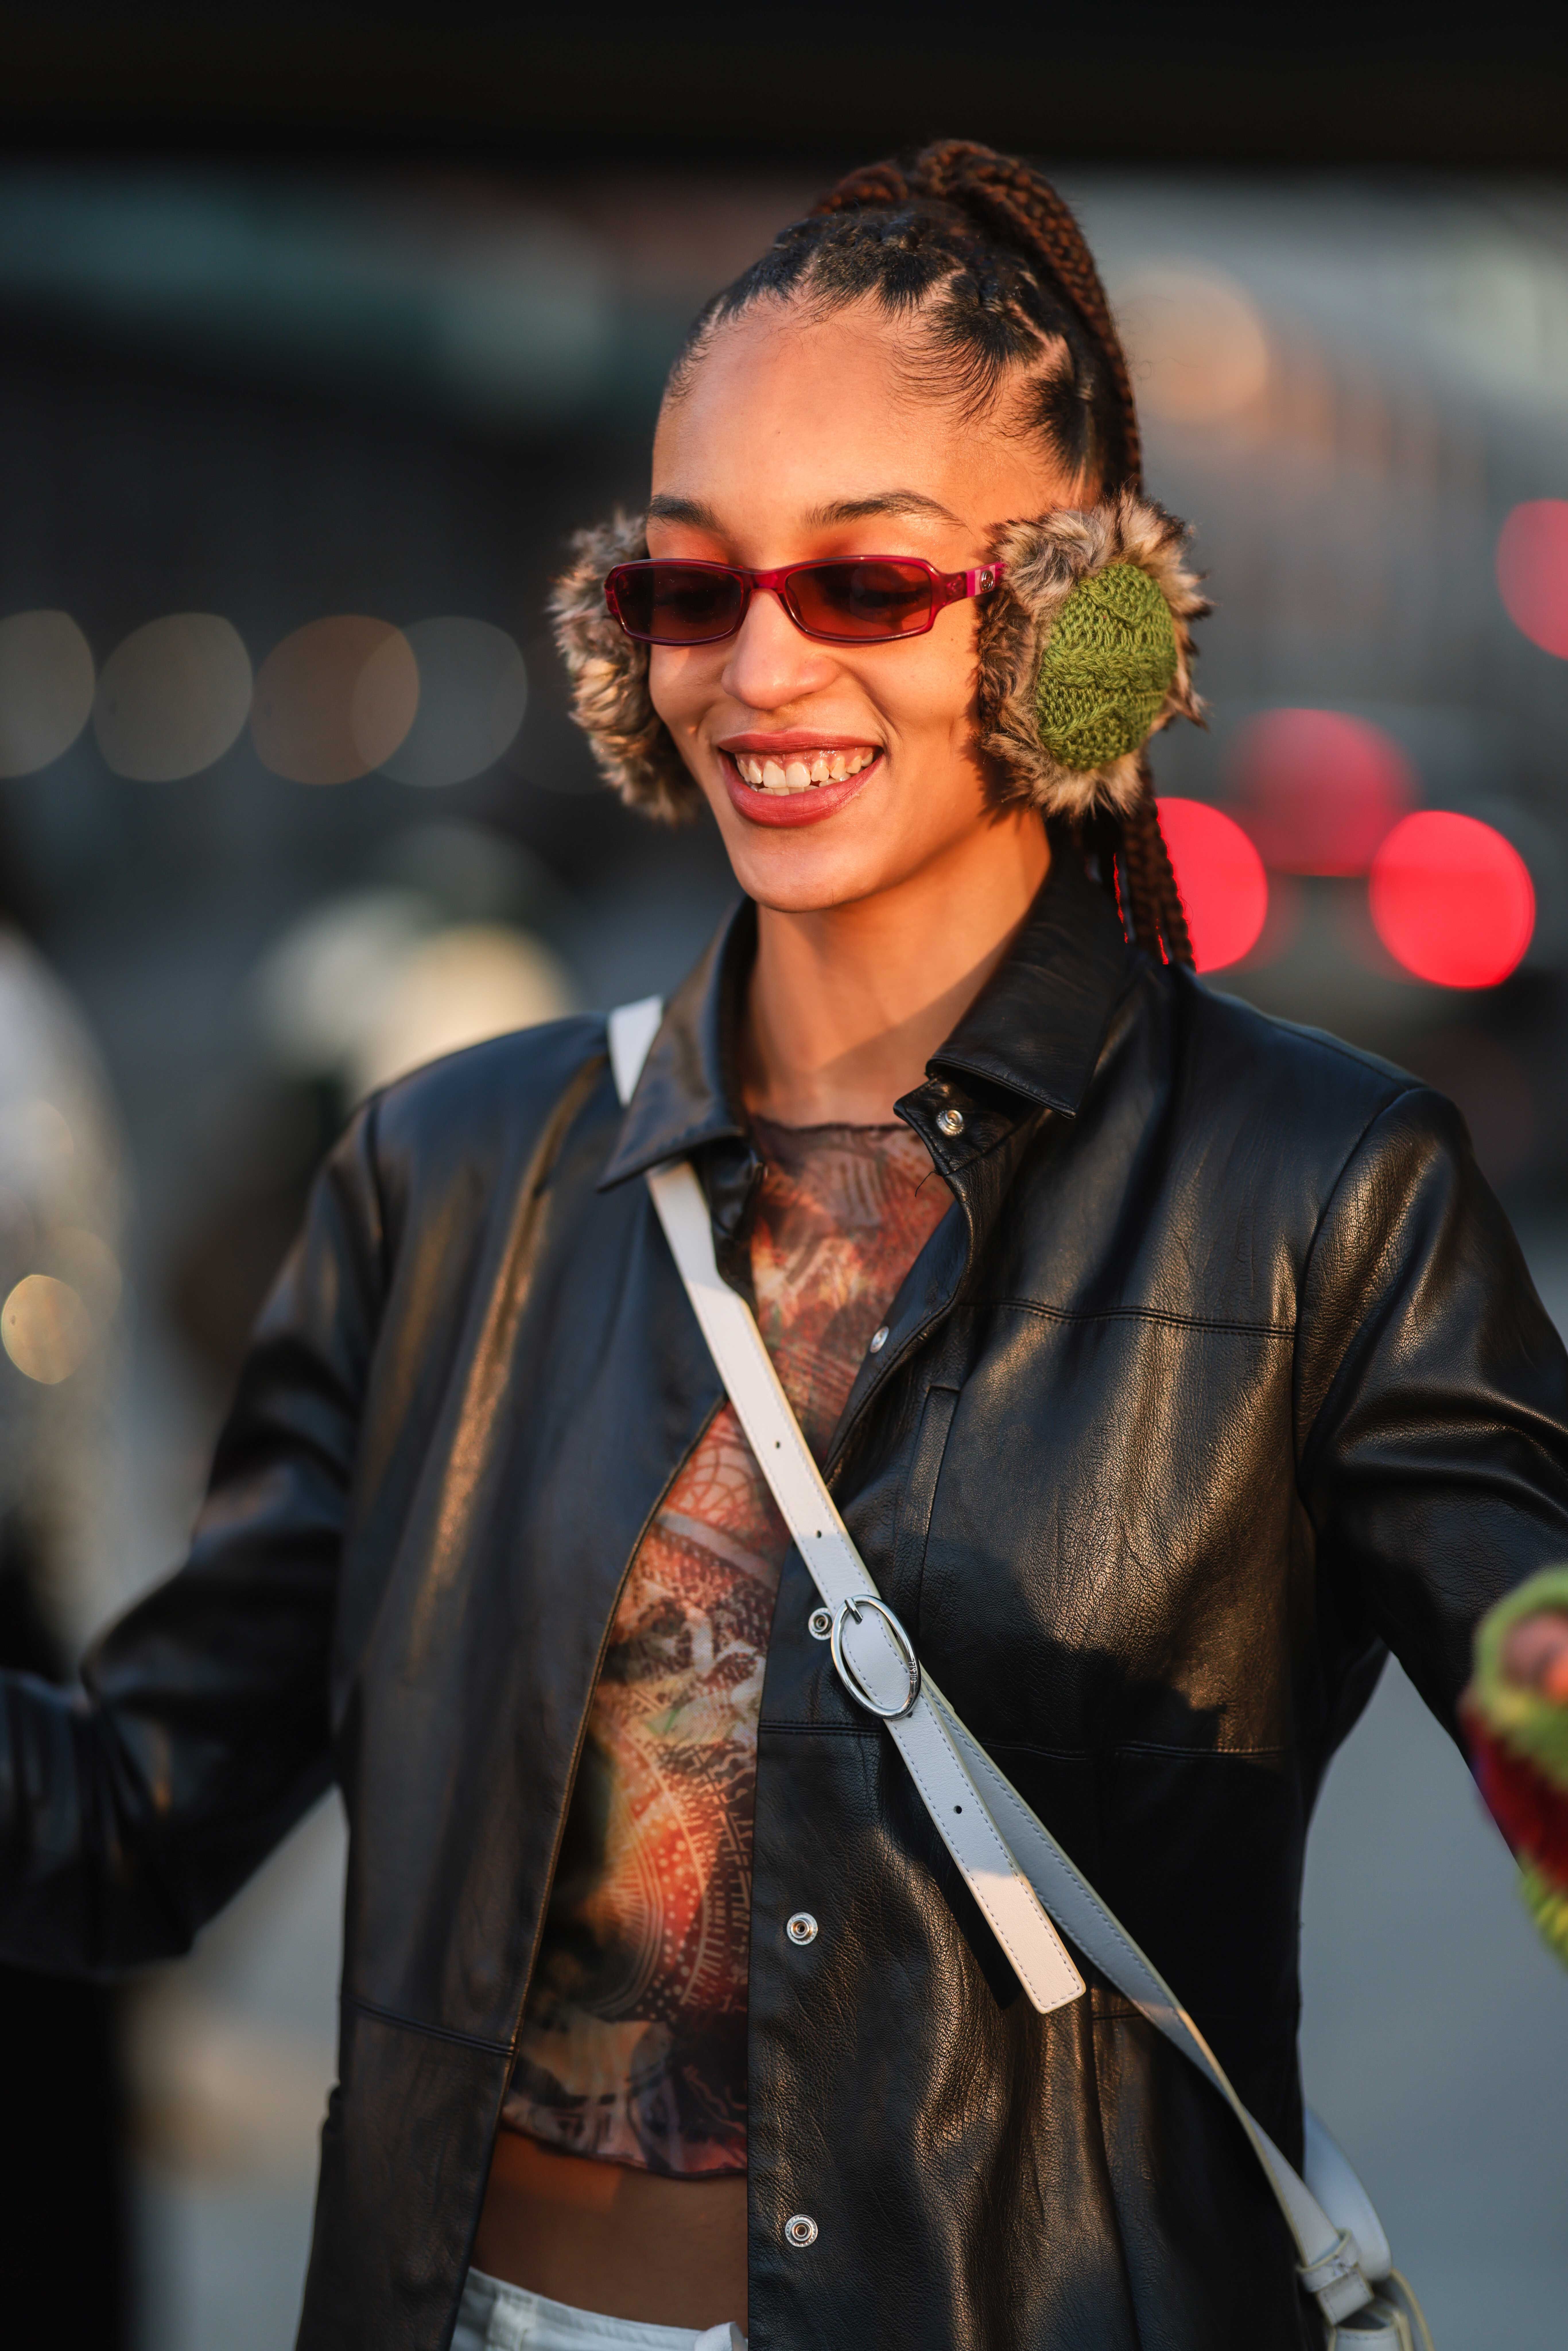 11 Chic Earmuffs to Accessorize Your Cold-Weather Outfits